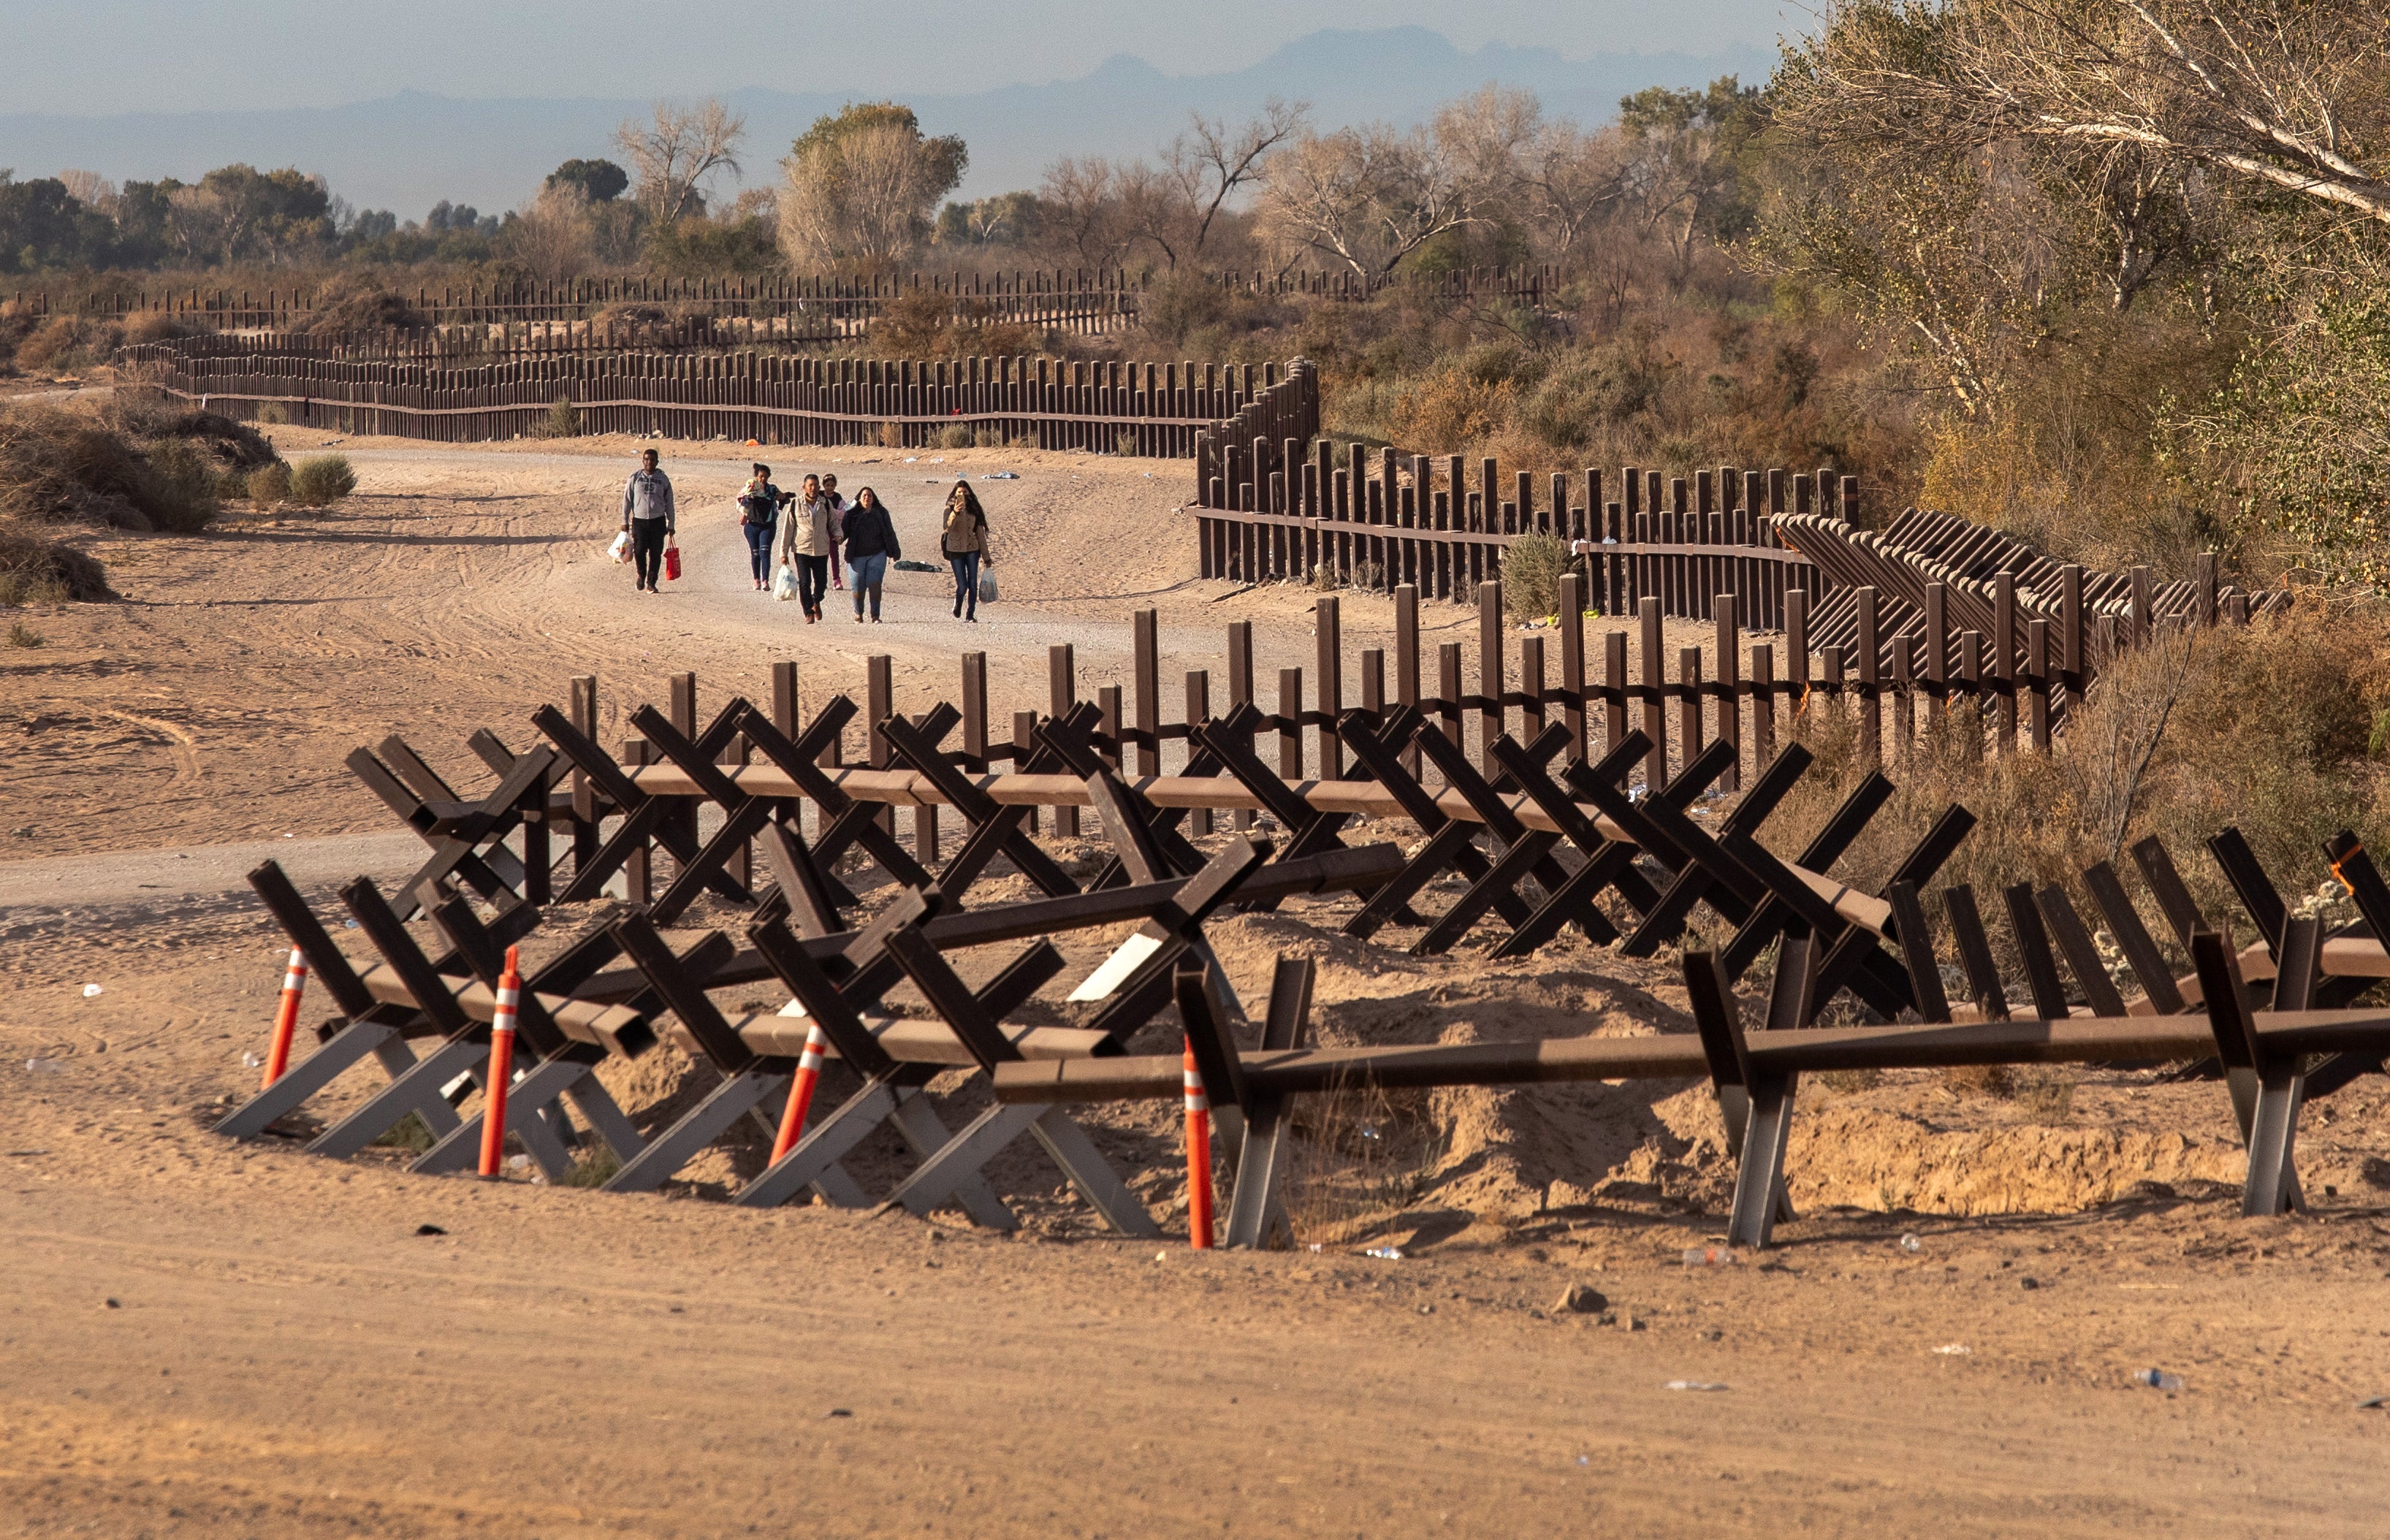 Immigrant families walk after crossing over a vehicle barrier at the US-Mexico border on December 07, 2021 in Yuma, Arizona